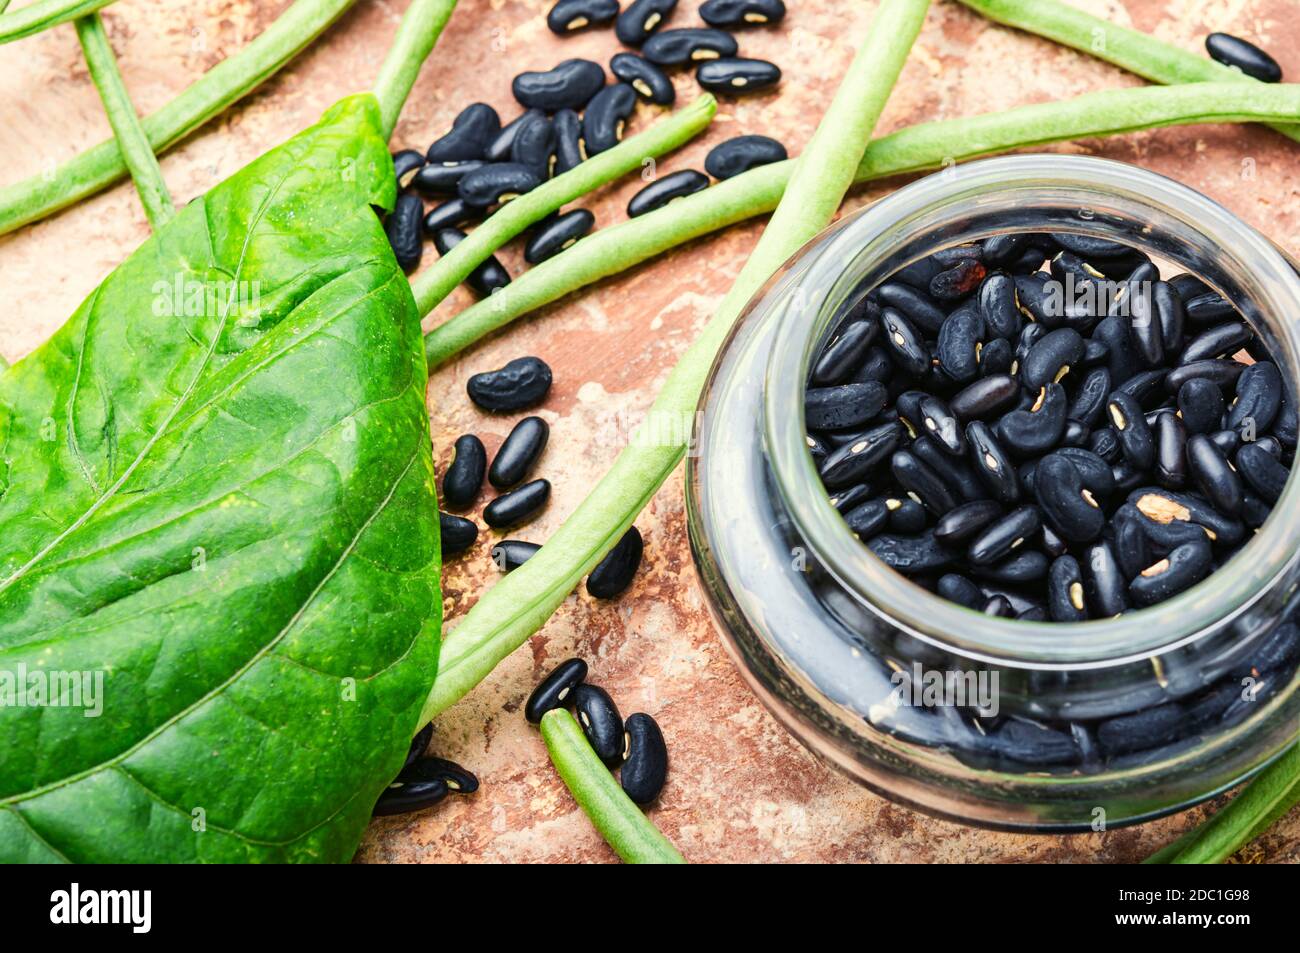 Vigna or cowpea pods and beans.Vegetable plant.Popular Chinese food. Stock Photo